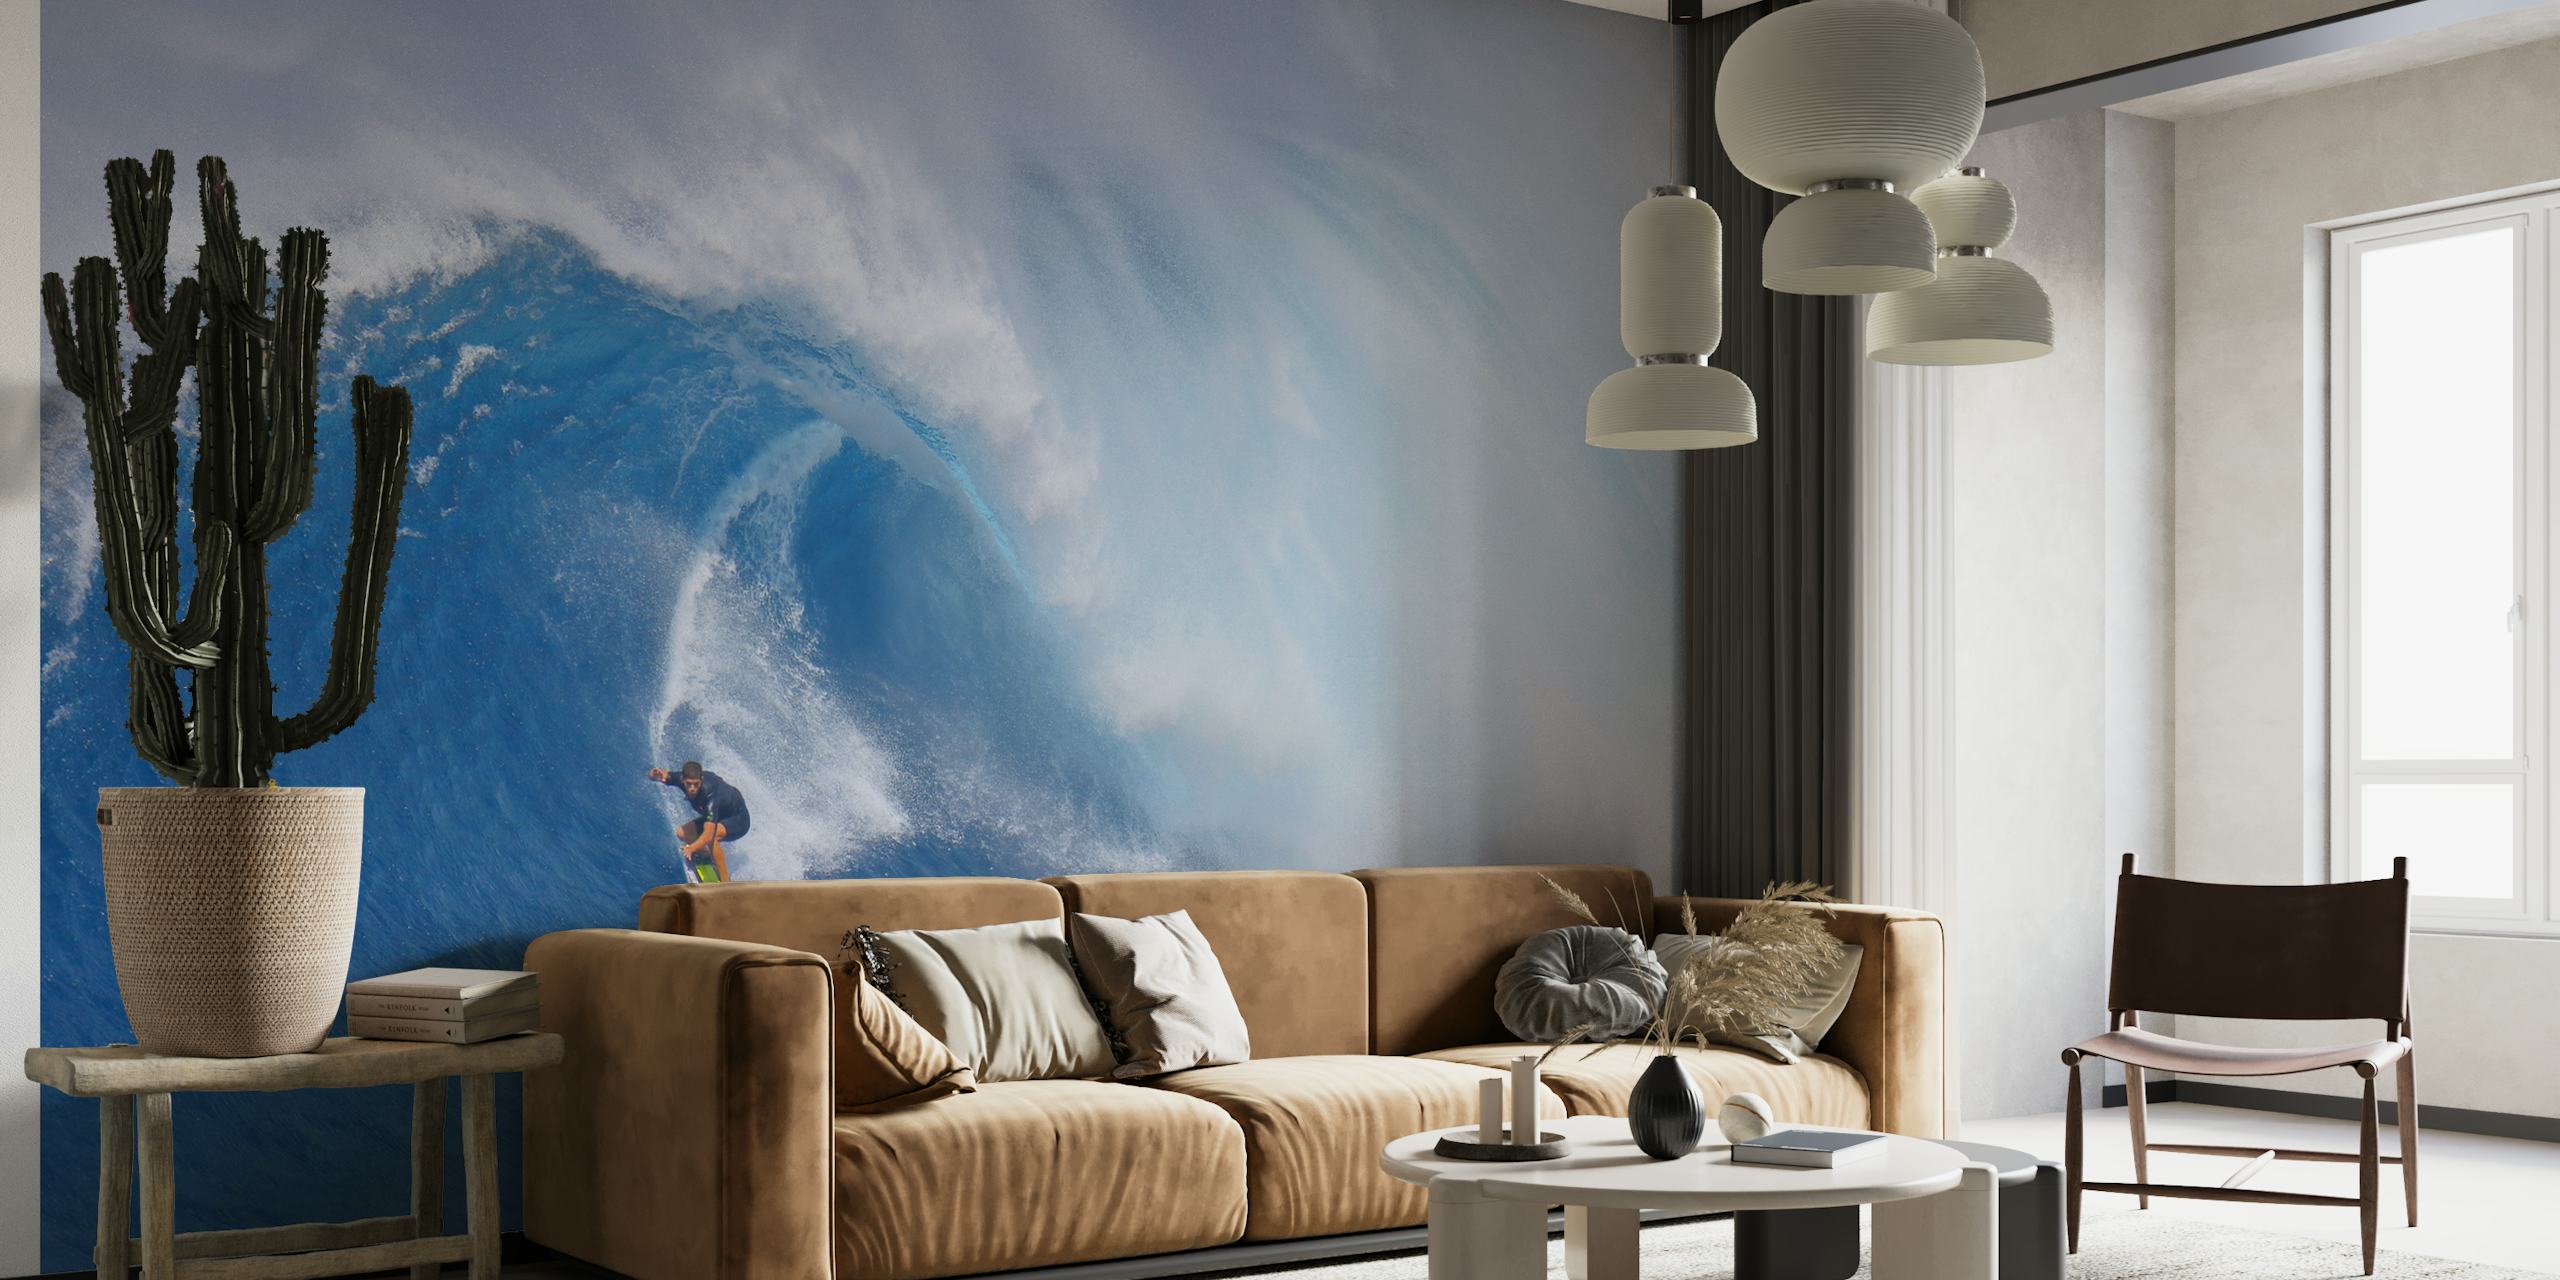 Surfer riding a giant wave in the 'Surfing Jaws' wall mural